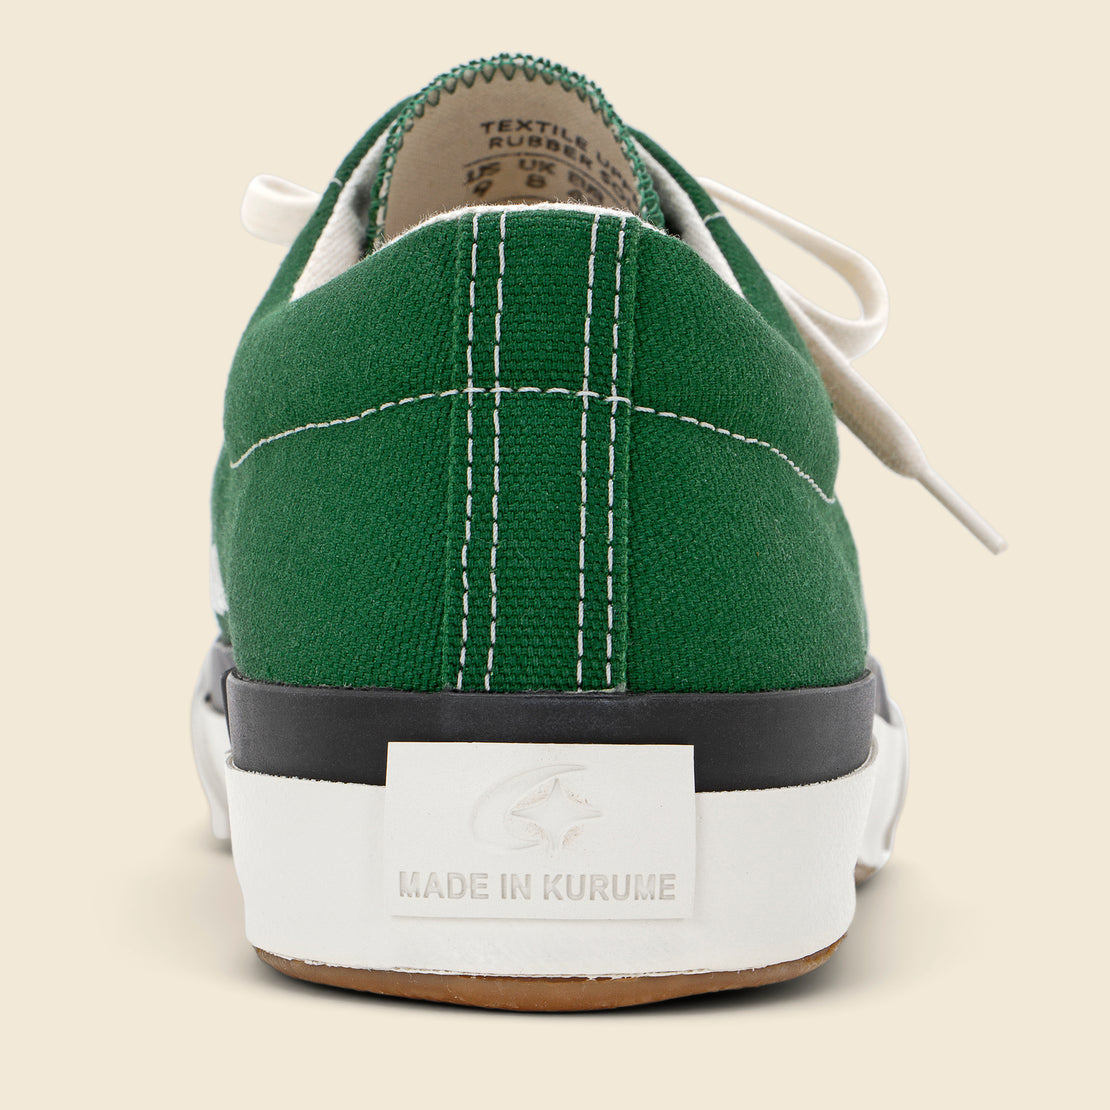 Gym Court (Moonstar) Sneaker - Green - Shoes Like Pottery - STAG Provisions - Shoes - Athletic